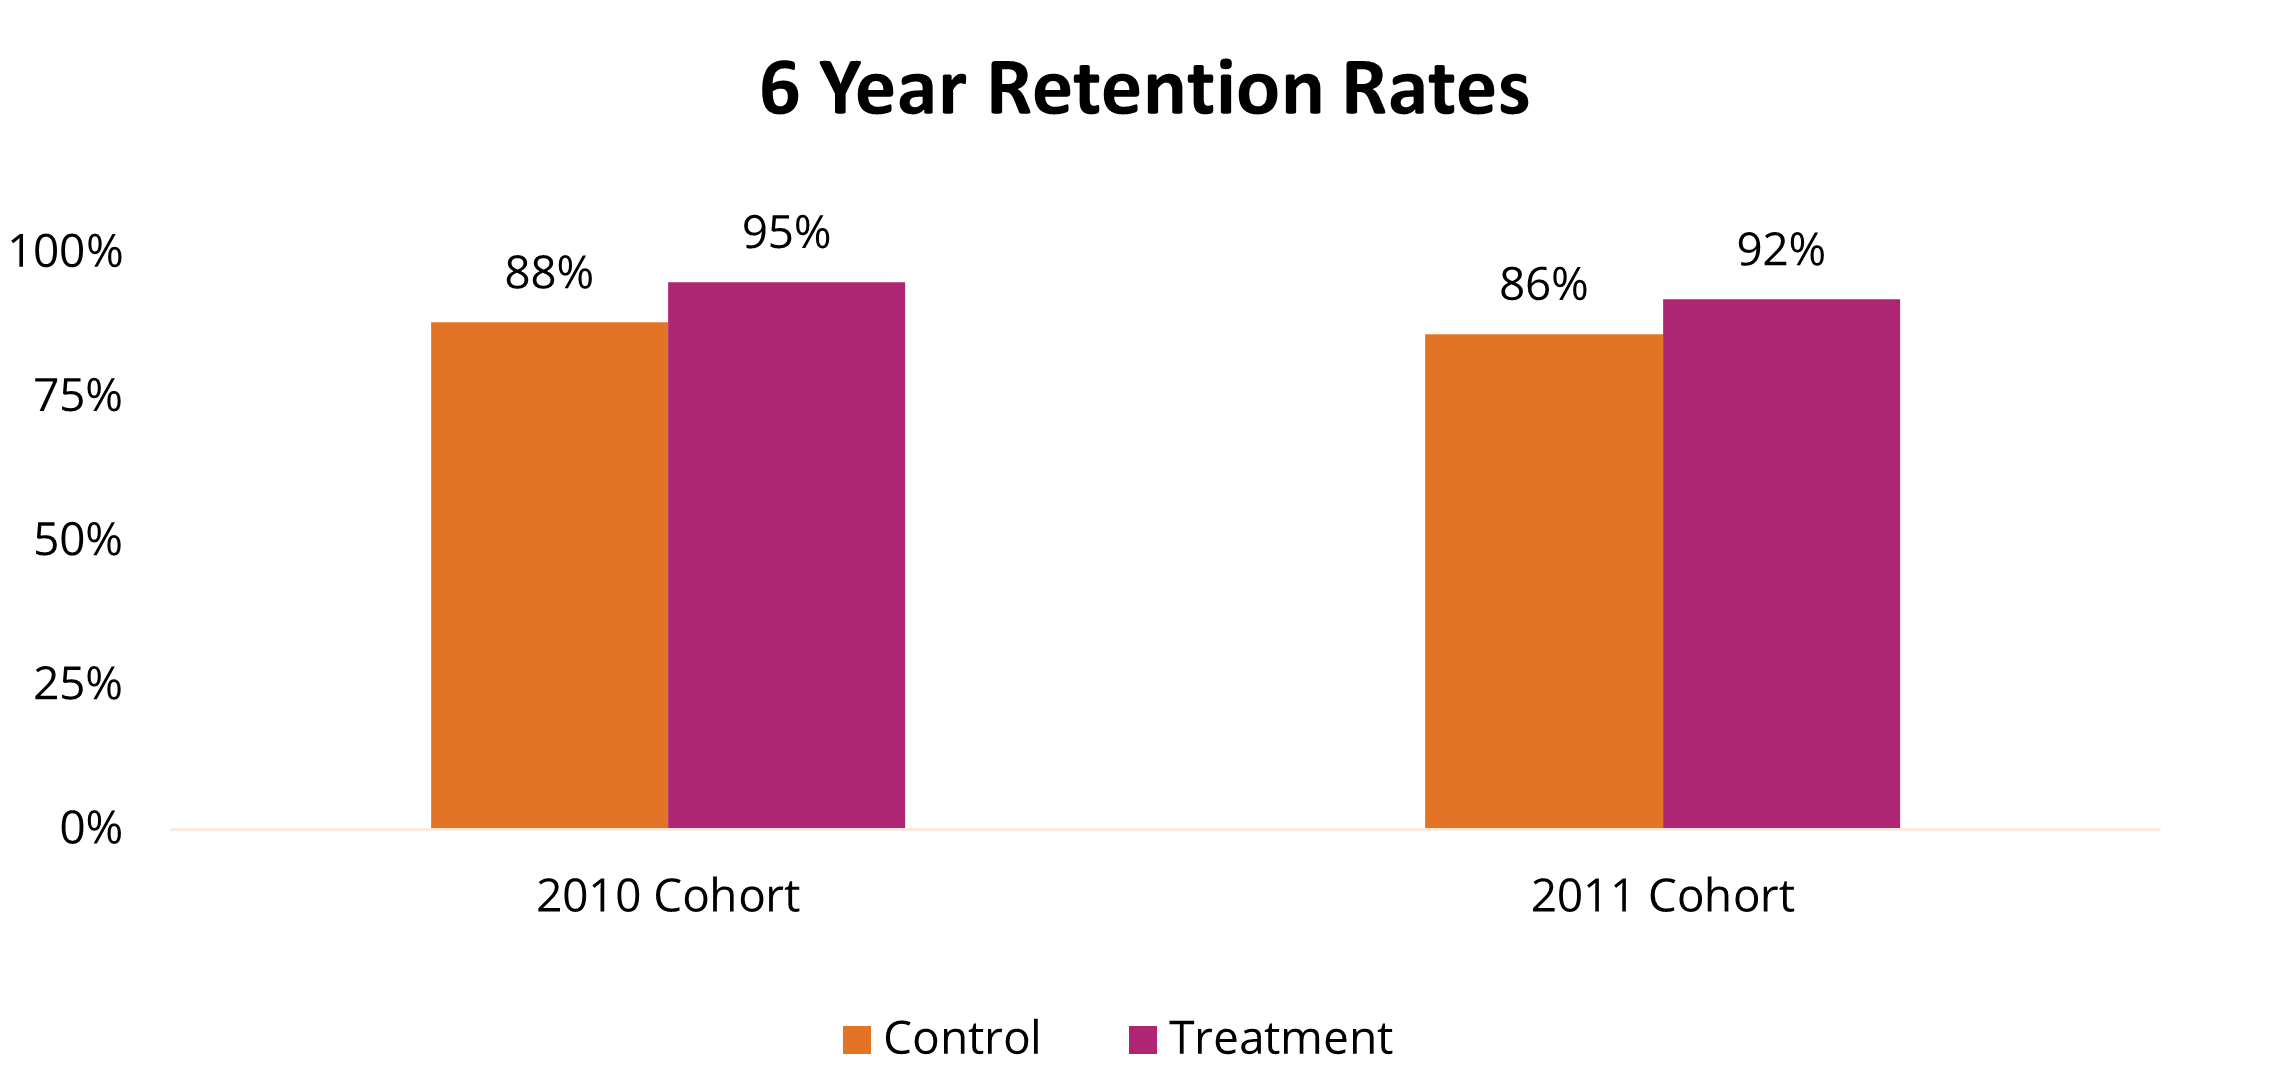 Chart showing 6-year Retention Rates